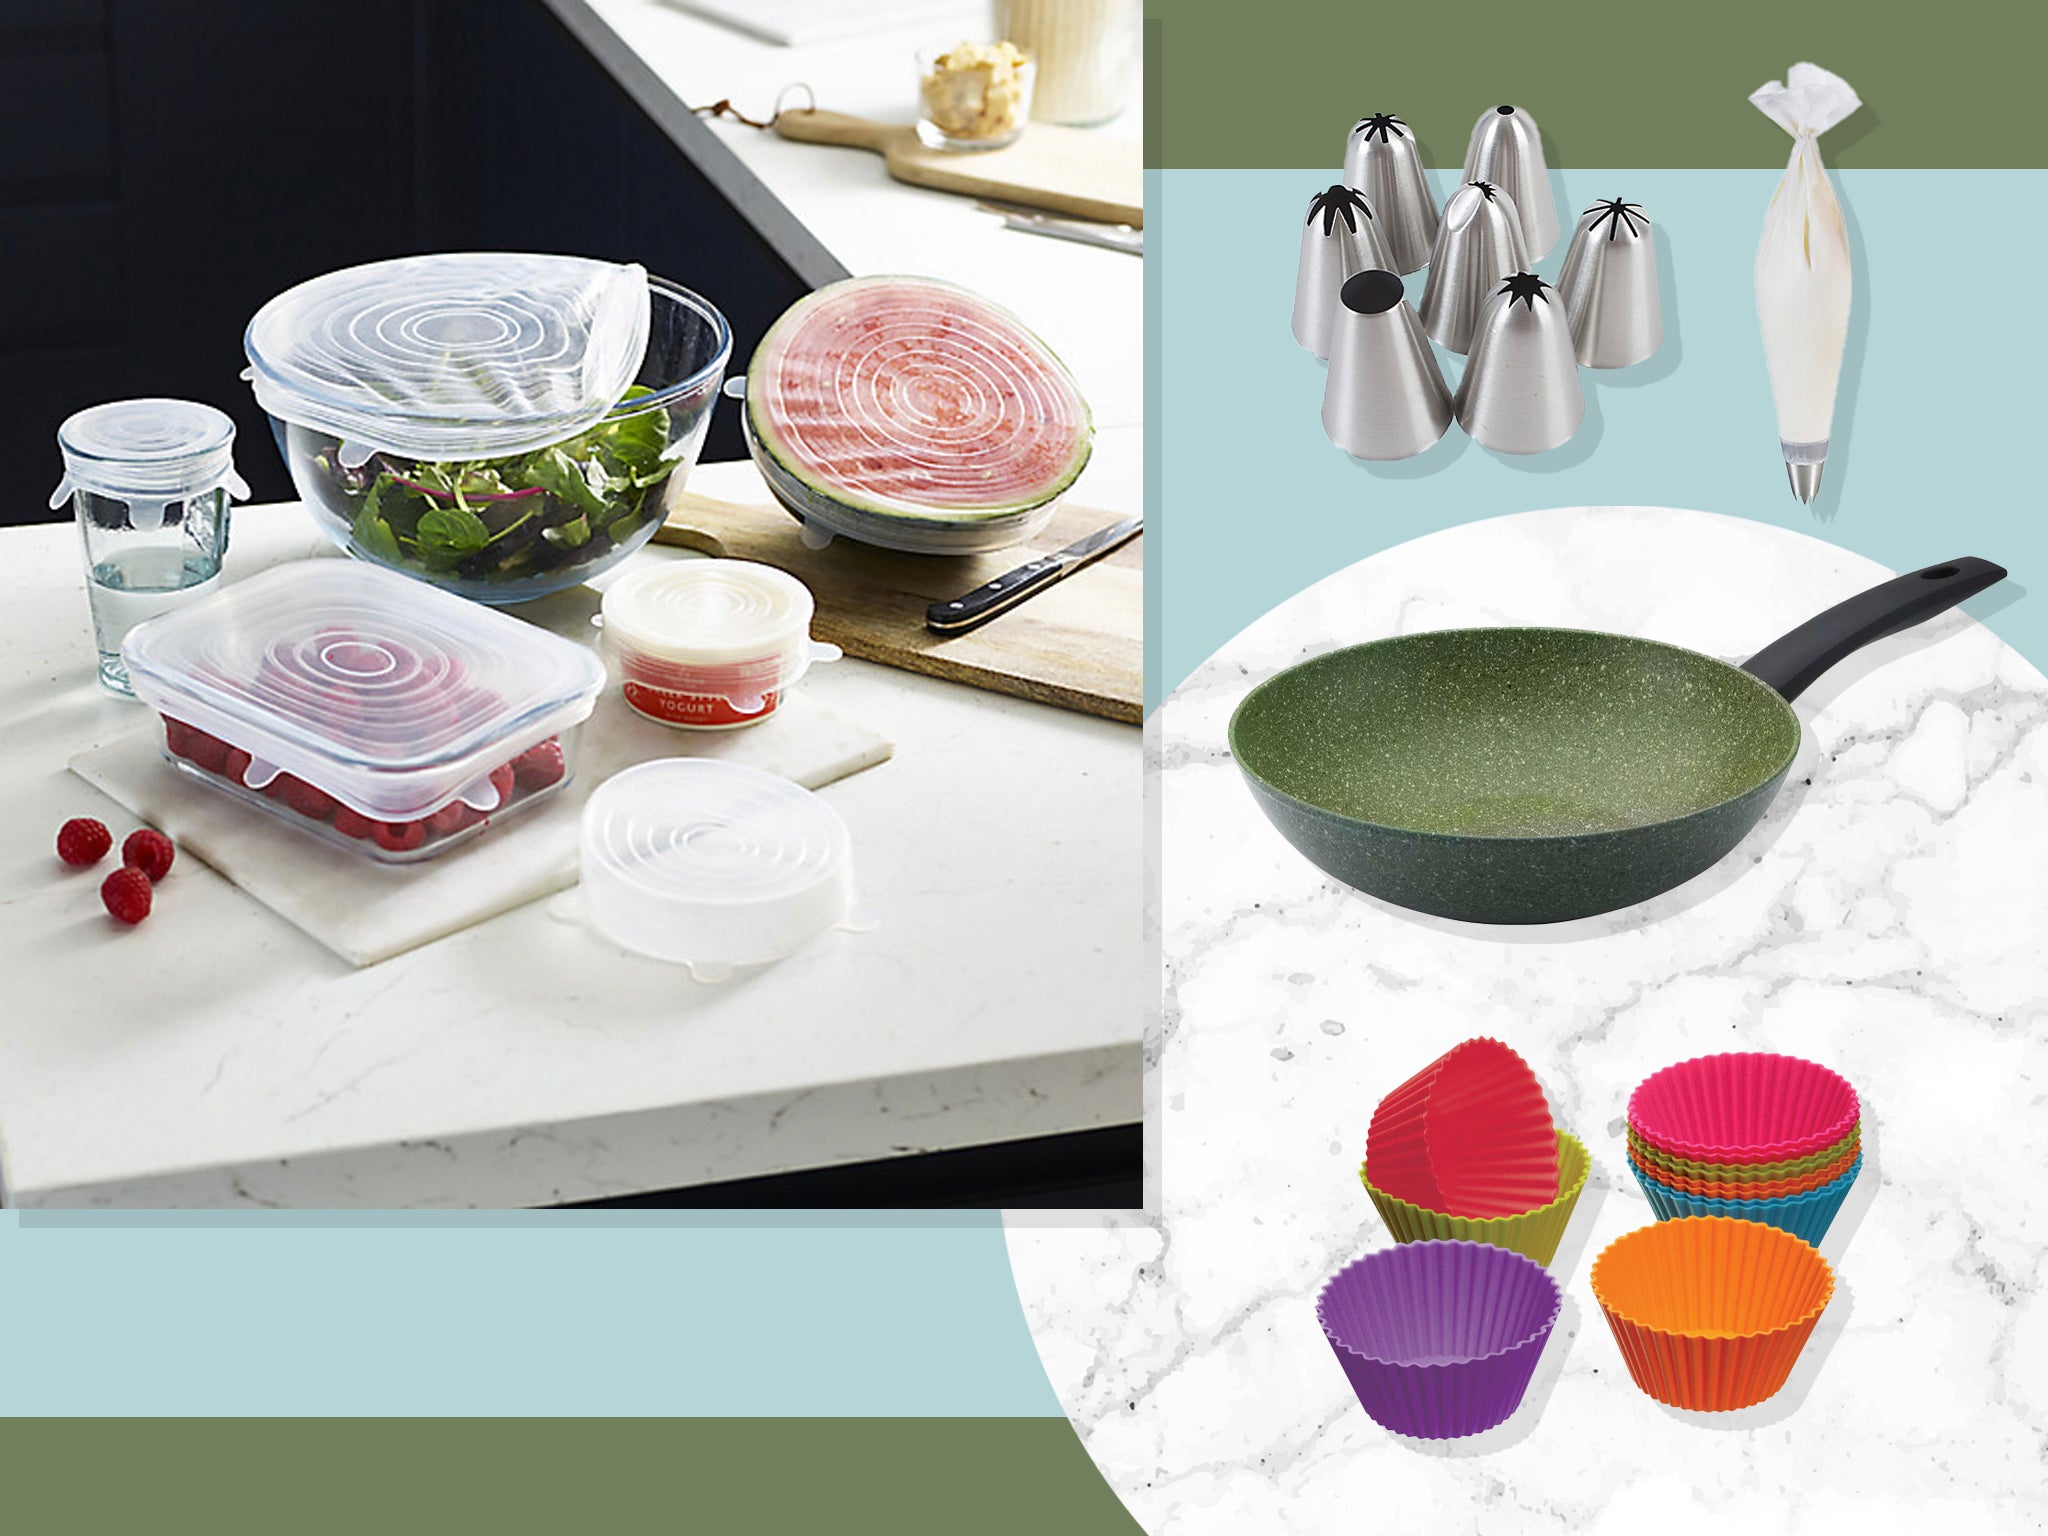 The 10 Best Home & Kitchen Products to Sell on